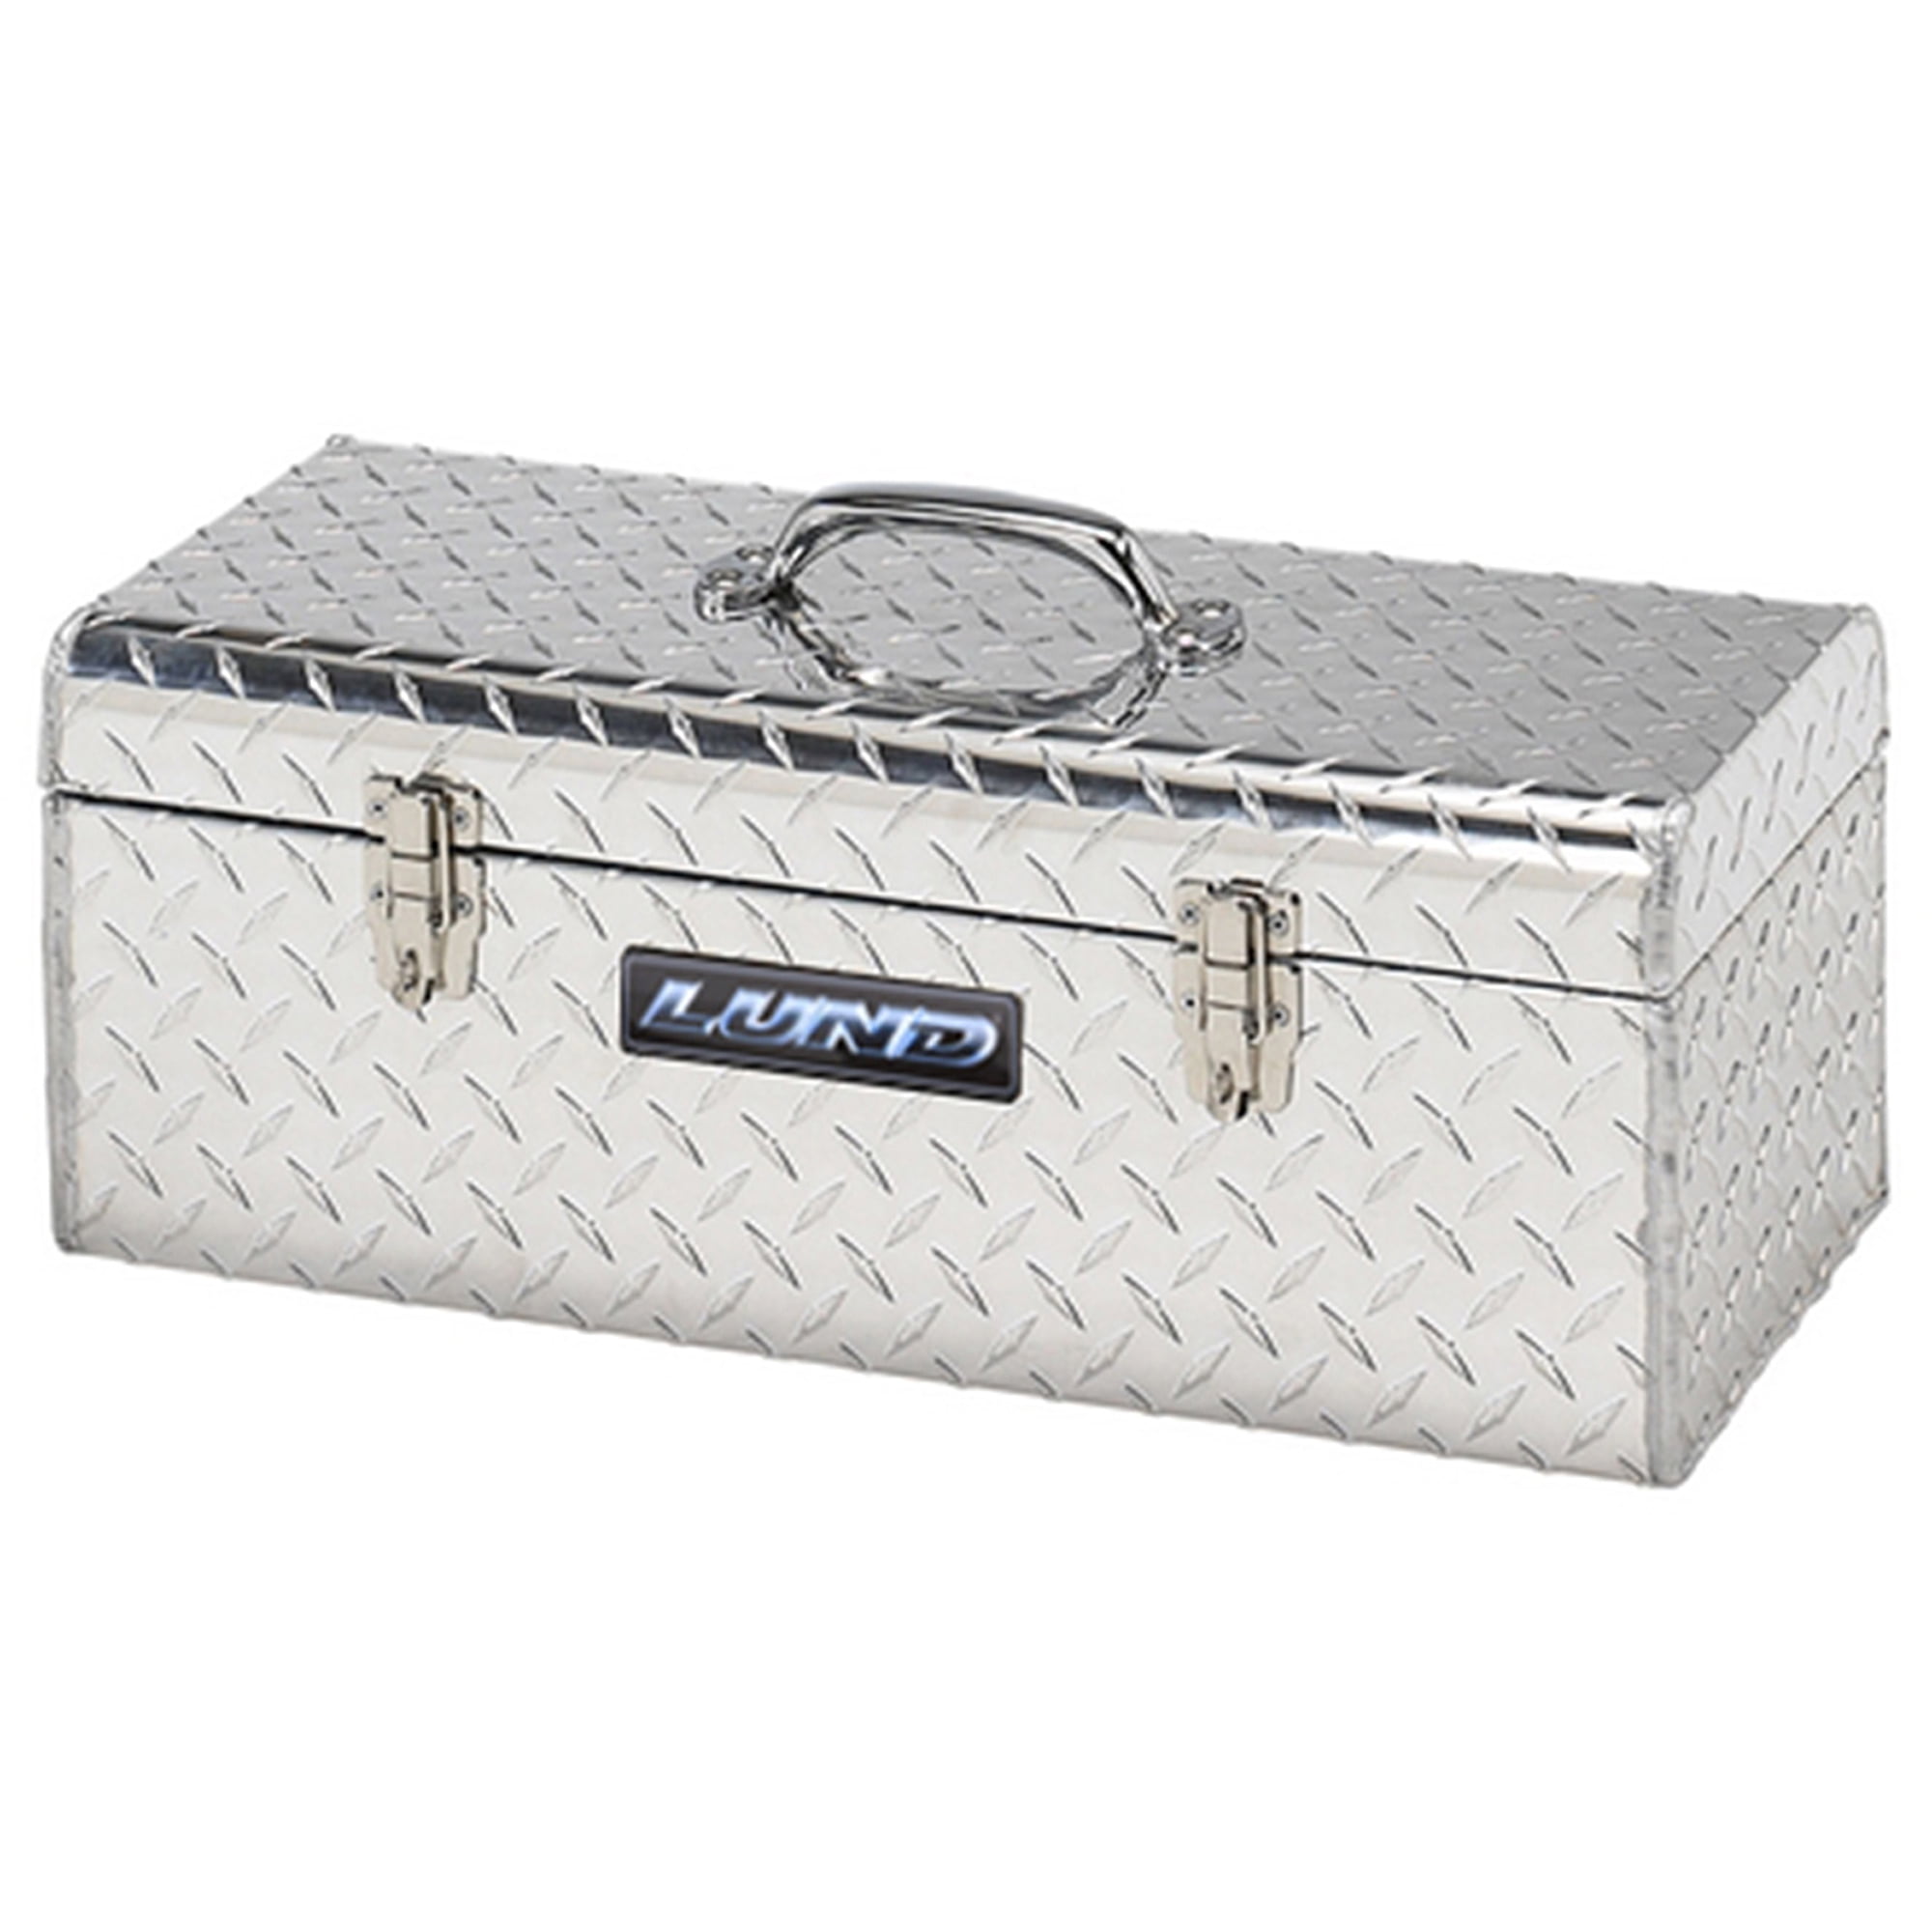 Lund 5124T 24 Inch Aluminum Handheld Tool Box, Diamond Plated, Silver